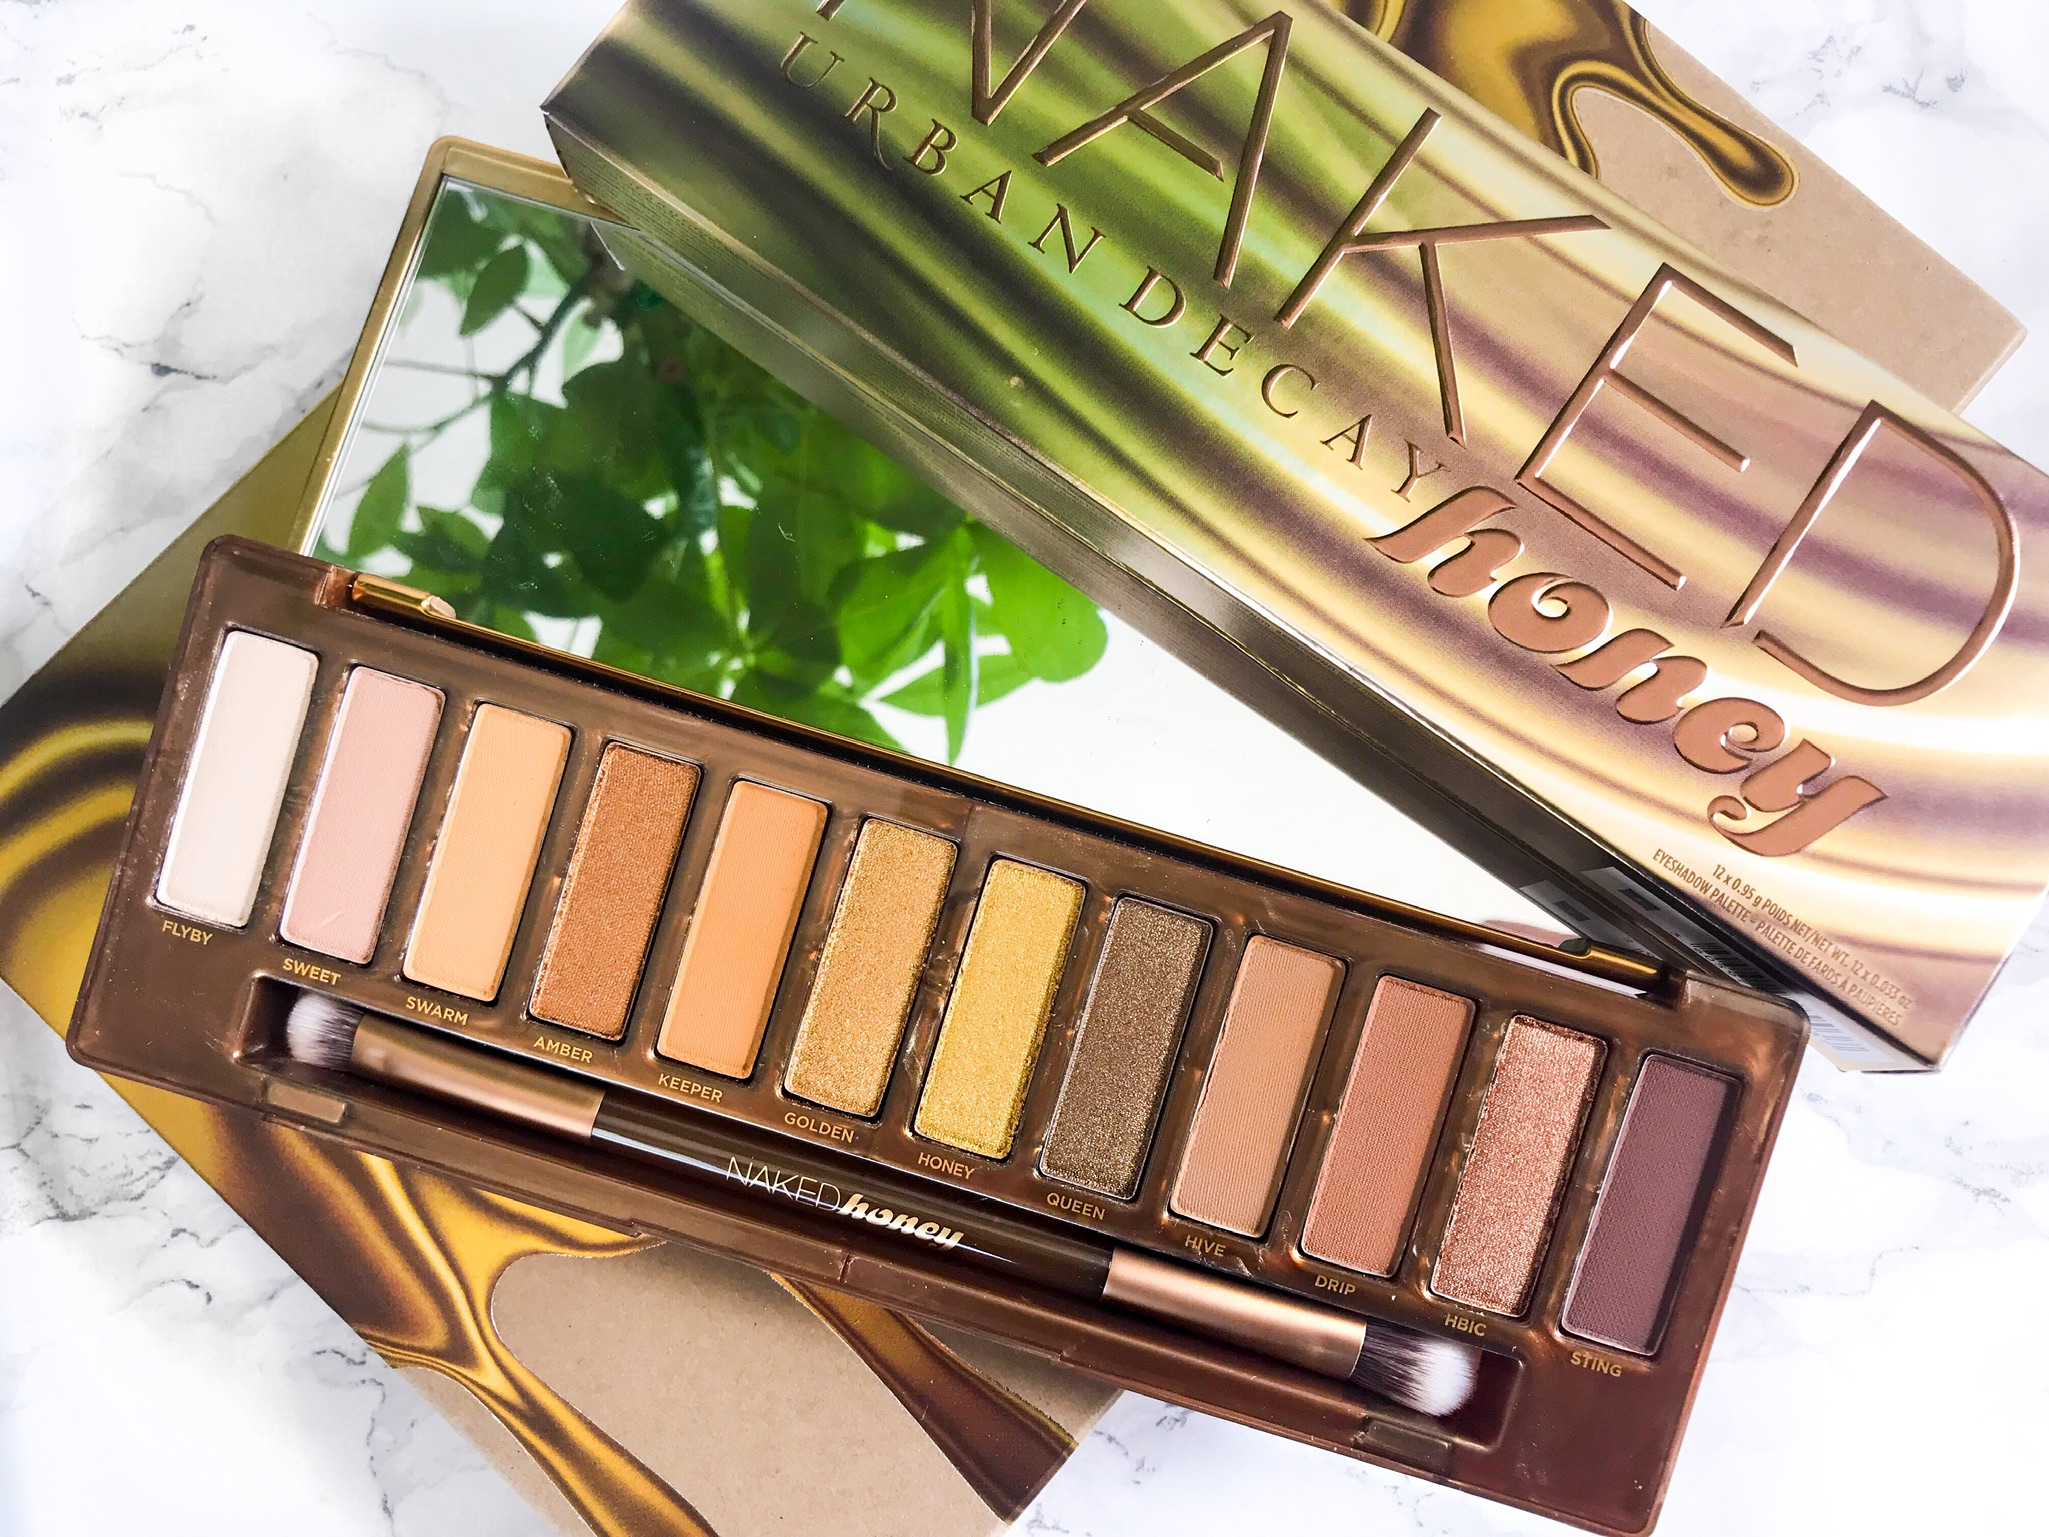 Urban Decay Naked Honey Eyeshadow Palette Review - Violet 